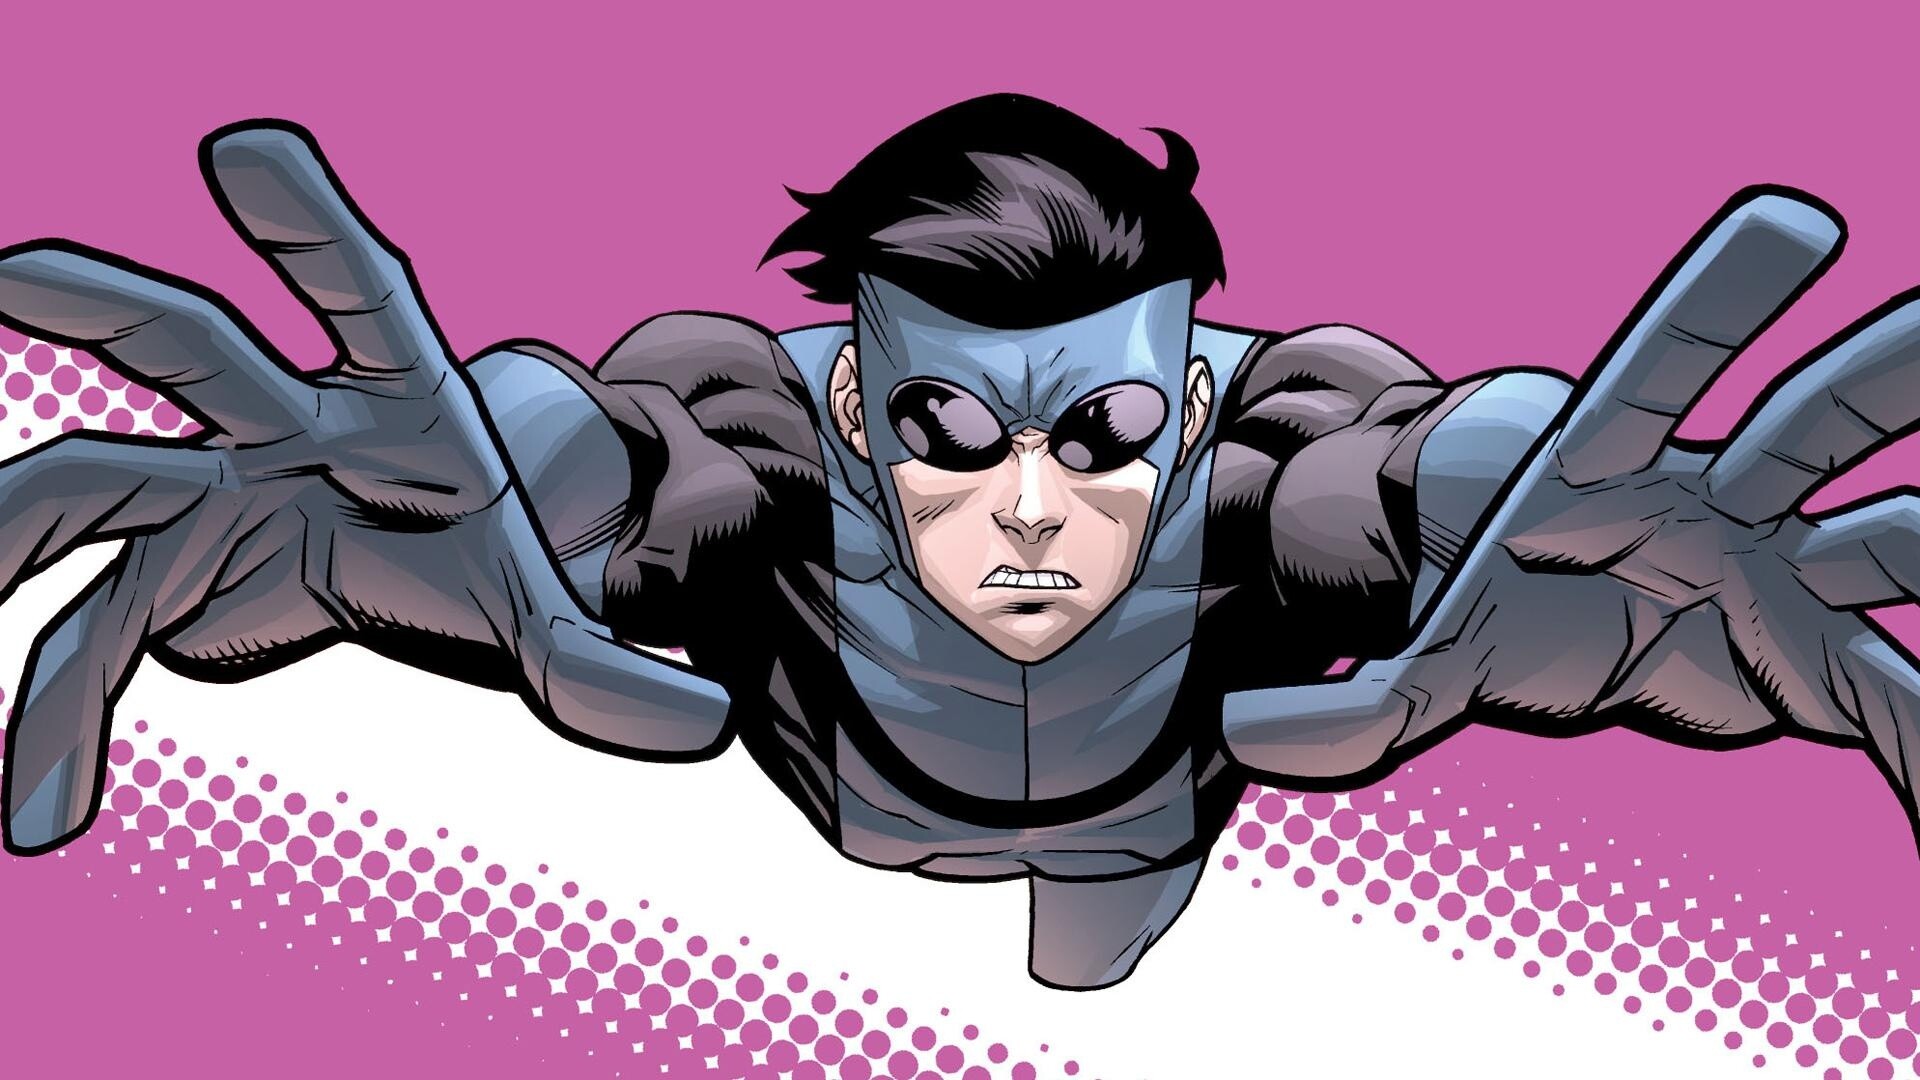 Invincible, Collection of wallpapers, Superhero themes, High-resolution, 1920x1080 Full HD Desktop